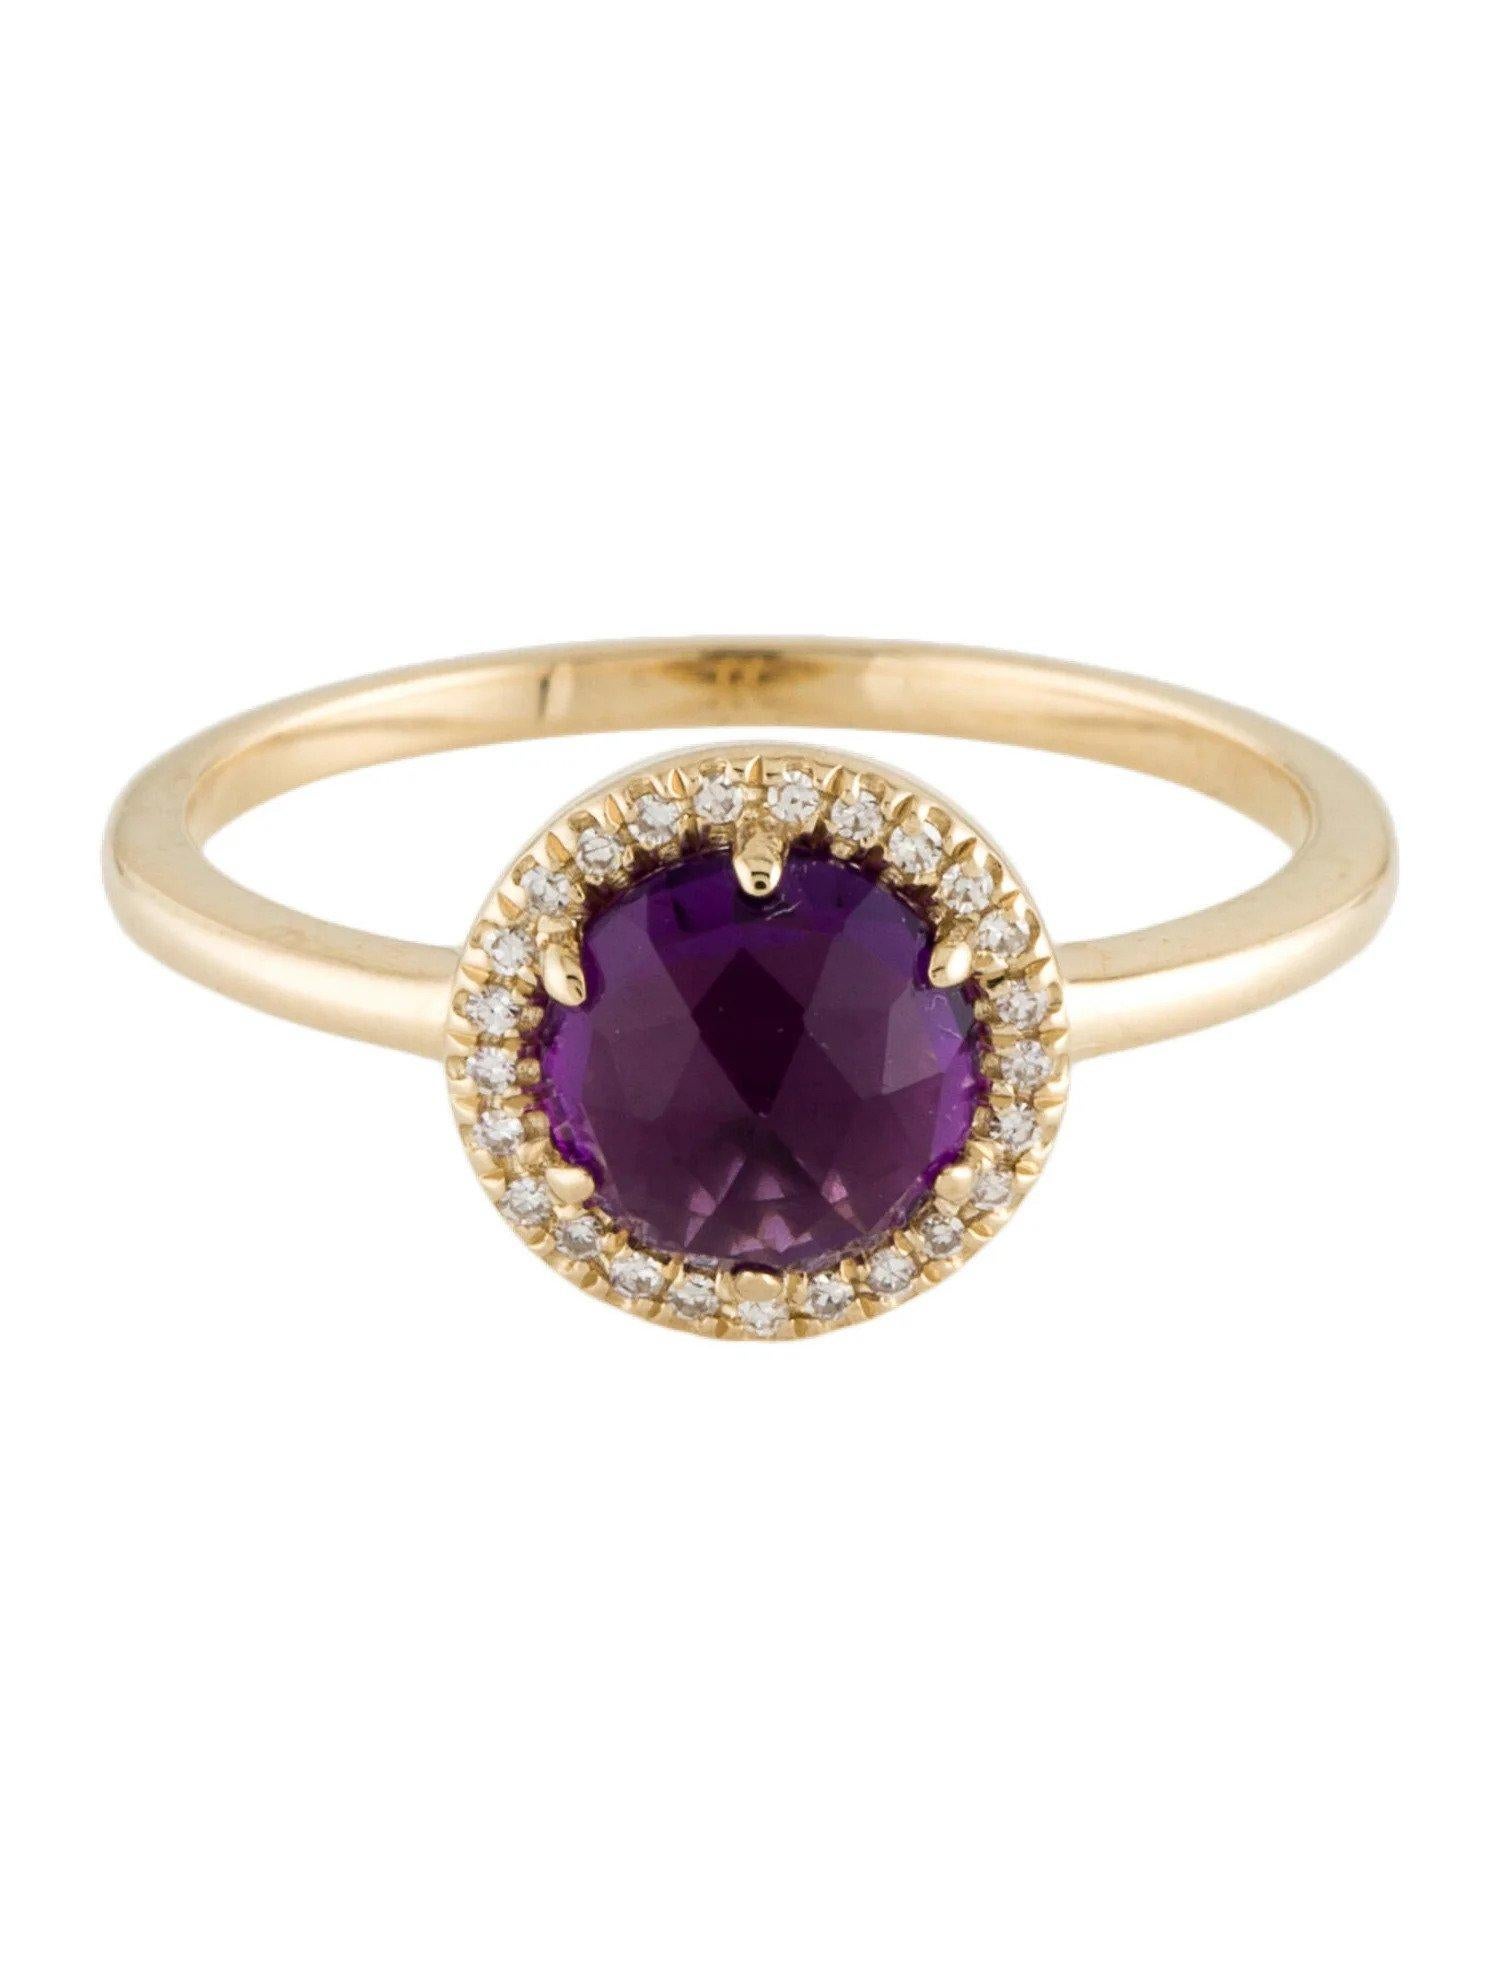 This Amethyst & Diamond Ring is a stunning and timeless accessory that can add a touch of glamour and sophistication to any outfit. 

This ring features a 0.93 Carat Round Purple Amethyst, with a Diamond Halo comprised of 0.06 Carats of Single Cut